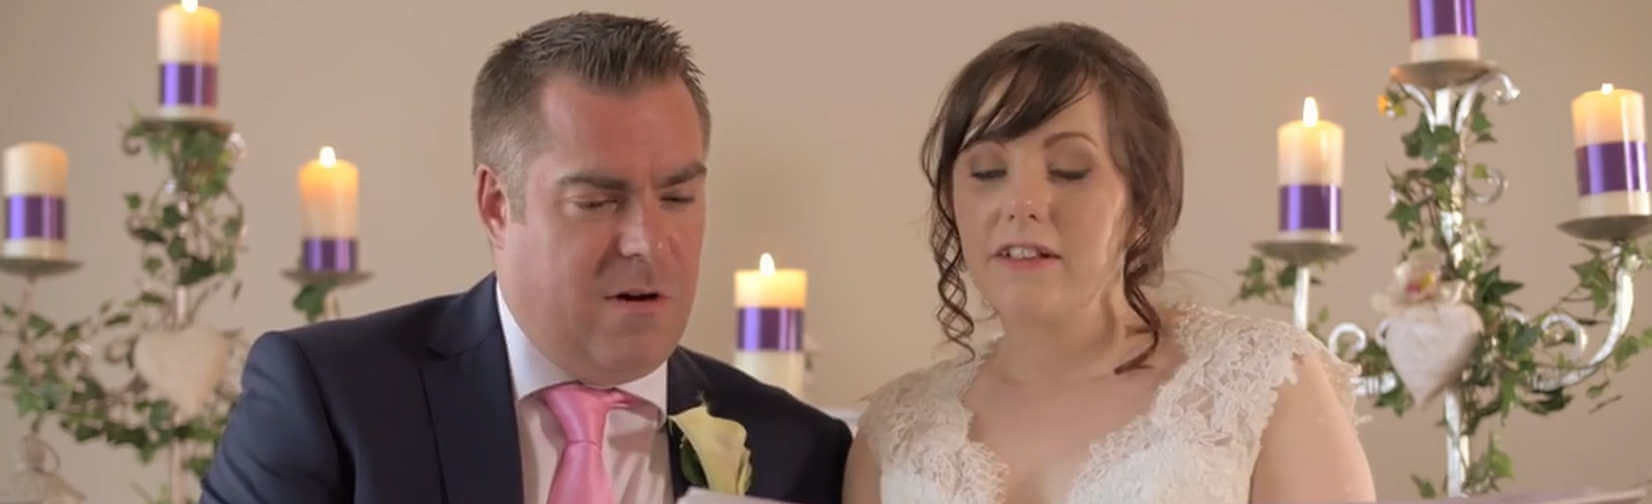 Lidl decided to help one loved -up couple make the most of their big day